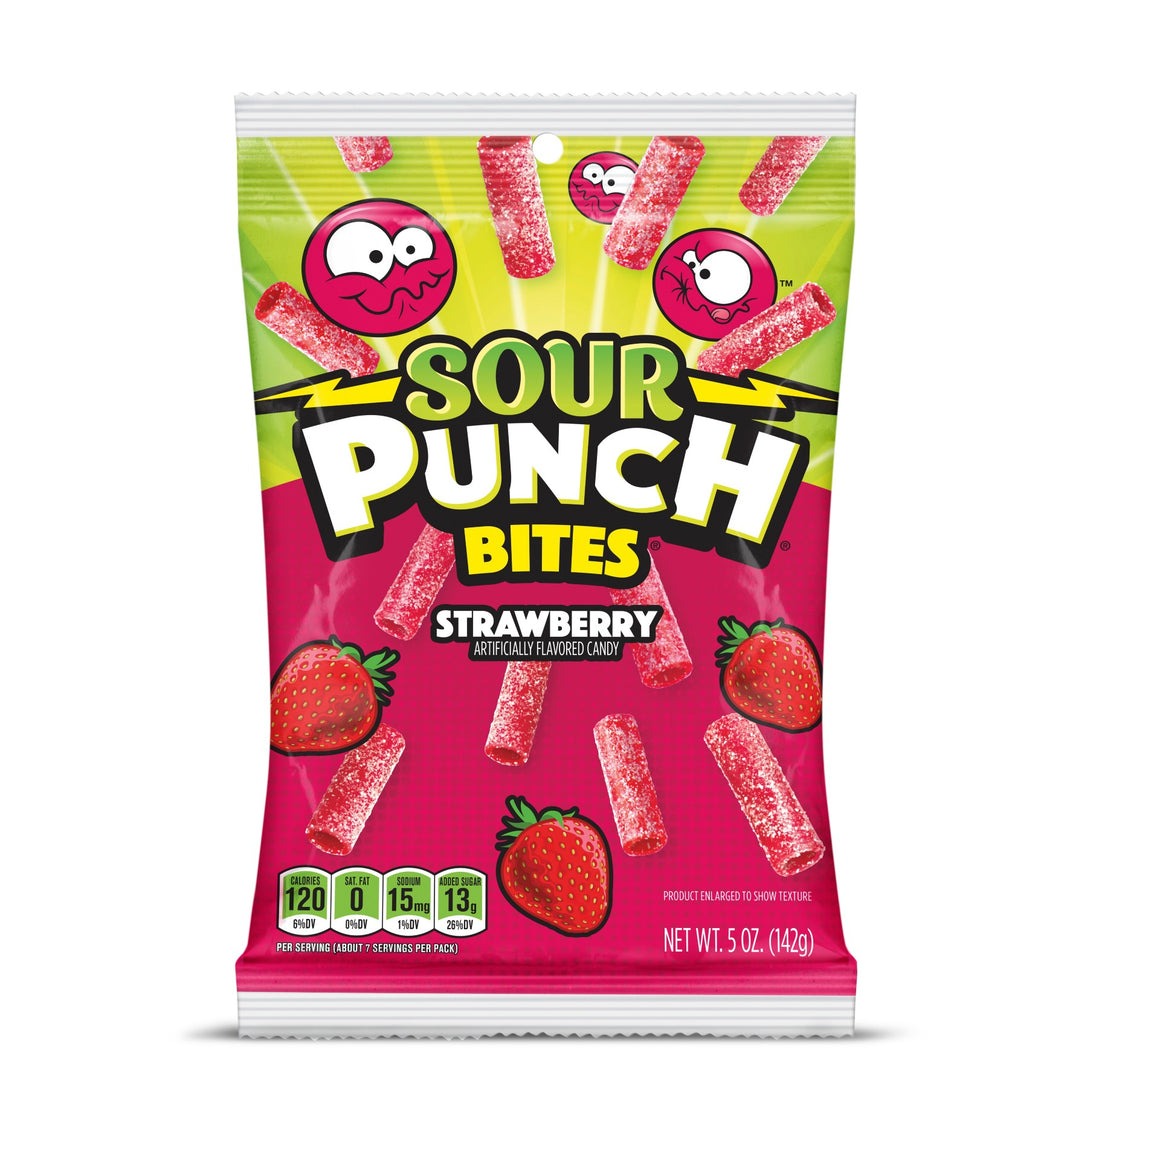 All City Candy Sour Punch Strawberry Bites - 5-oz. Bag Sour American Licorice Company For fresh candy and great service, visit www.allcitycandy.com